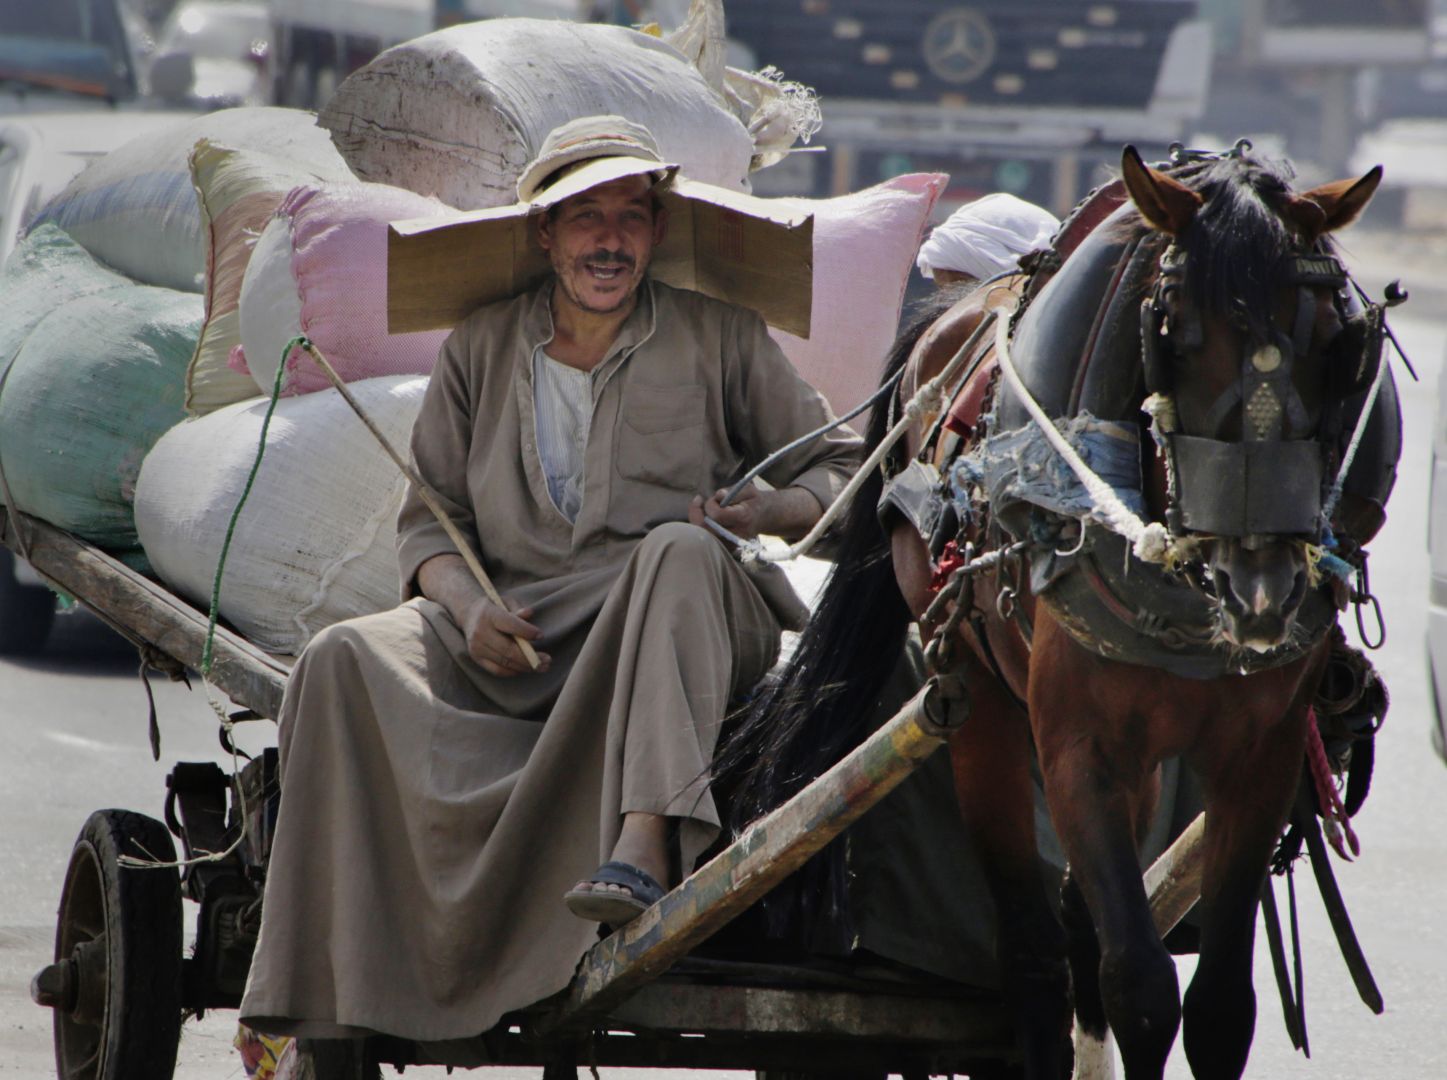 An Egyptian farmer rides his horse cart as he uses a makeshift hat with cardboard to protect his head from direct sunlight on a Cairo street in Egypt on Tuesday, Aug. 11, 2015. (AP Photo/Amr Nabil)